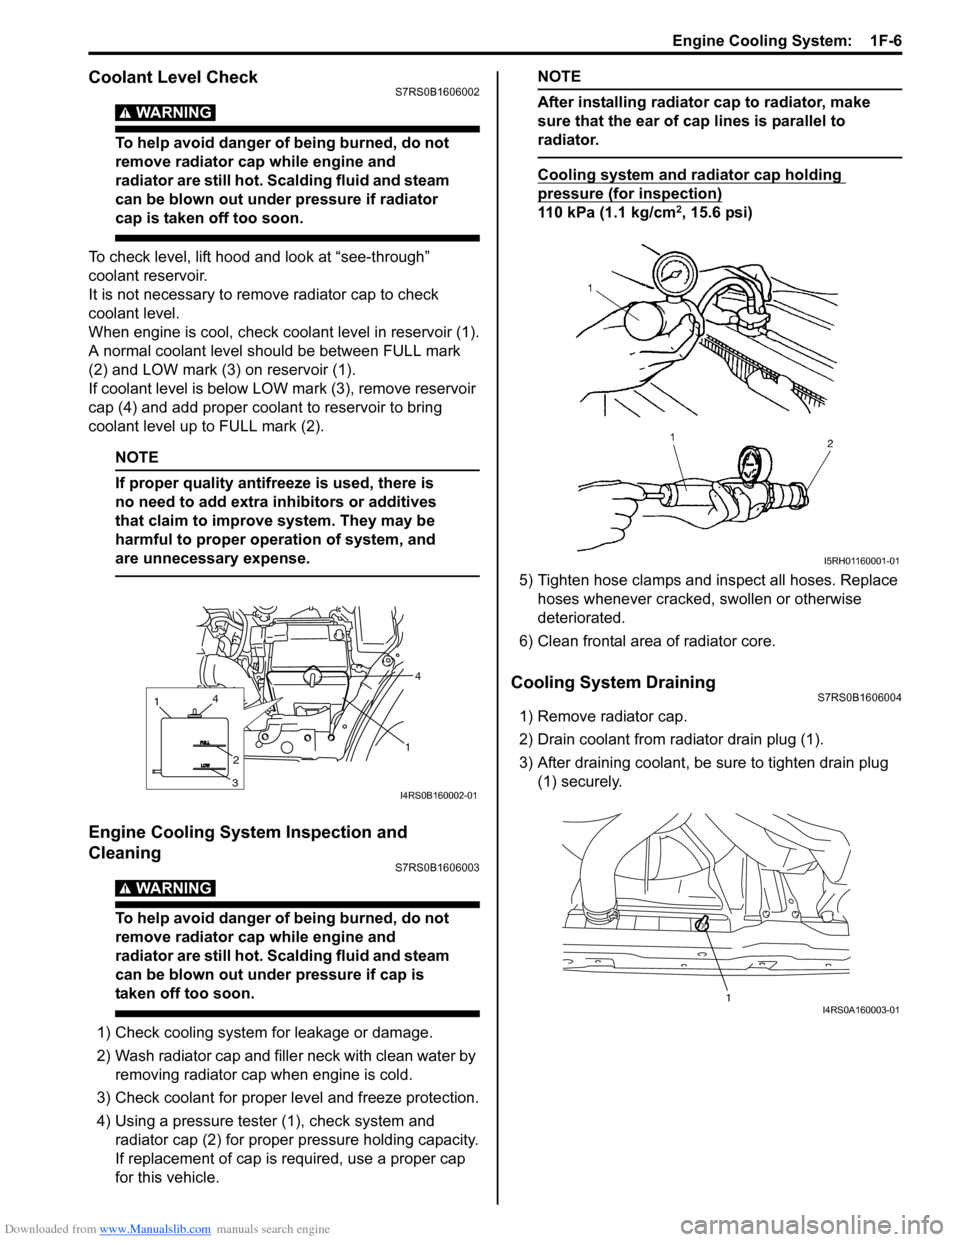 SUZUKI SWIFT 2007 2.G Service Service Manual Downloaded from www.Manualslib.com manuals search engine Engine Cooling System:  1F-6
Coolant Level CheckS7RS0B1606002
WARNING! 
To help avoid danger of being burned, do not 
remove radiator cap while